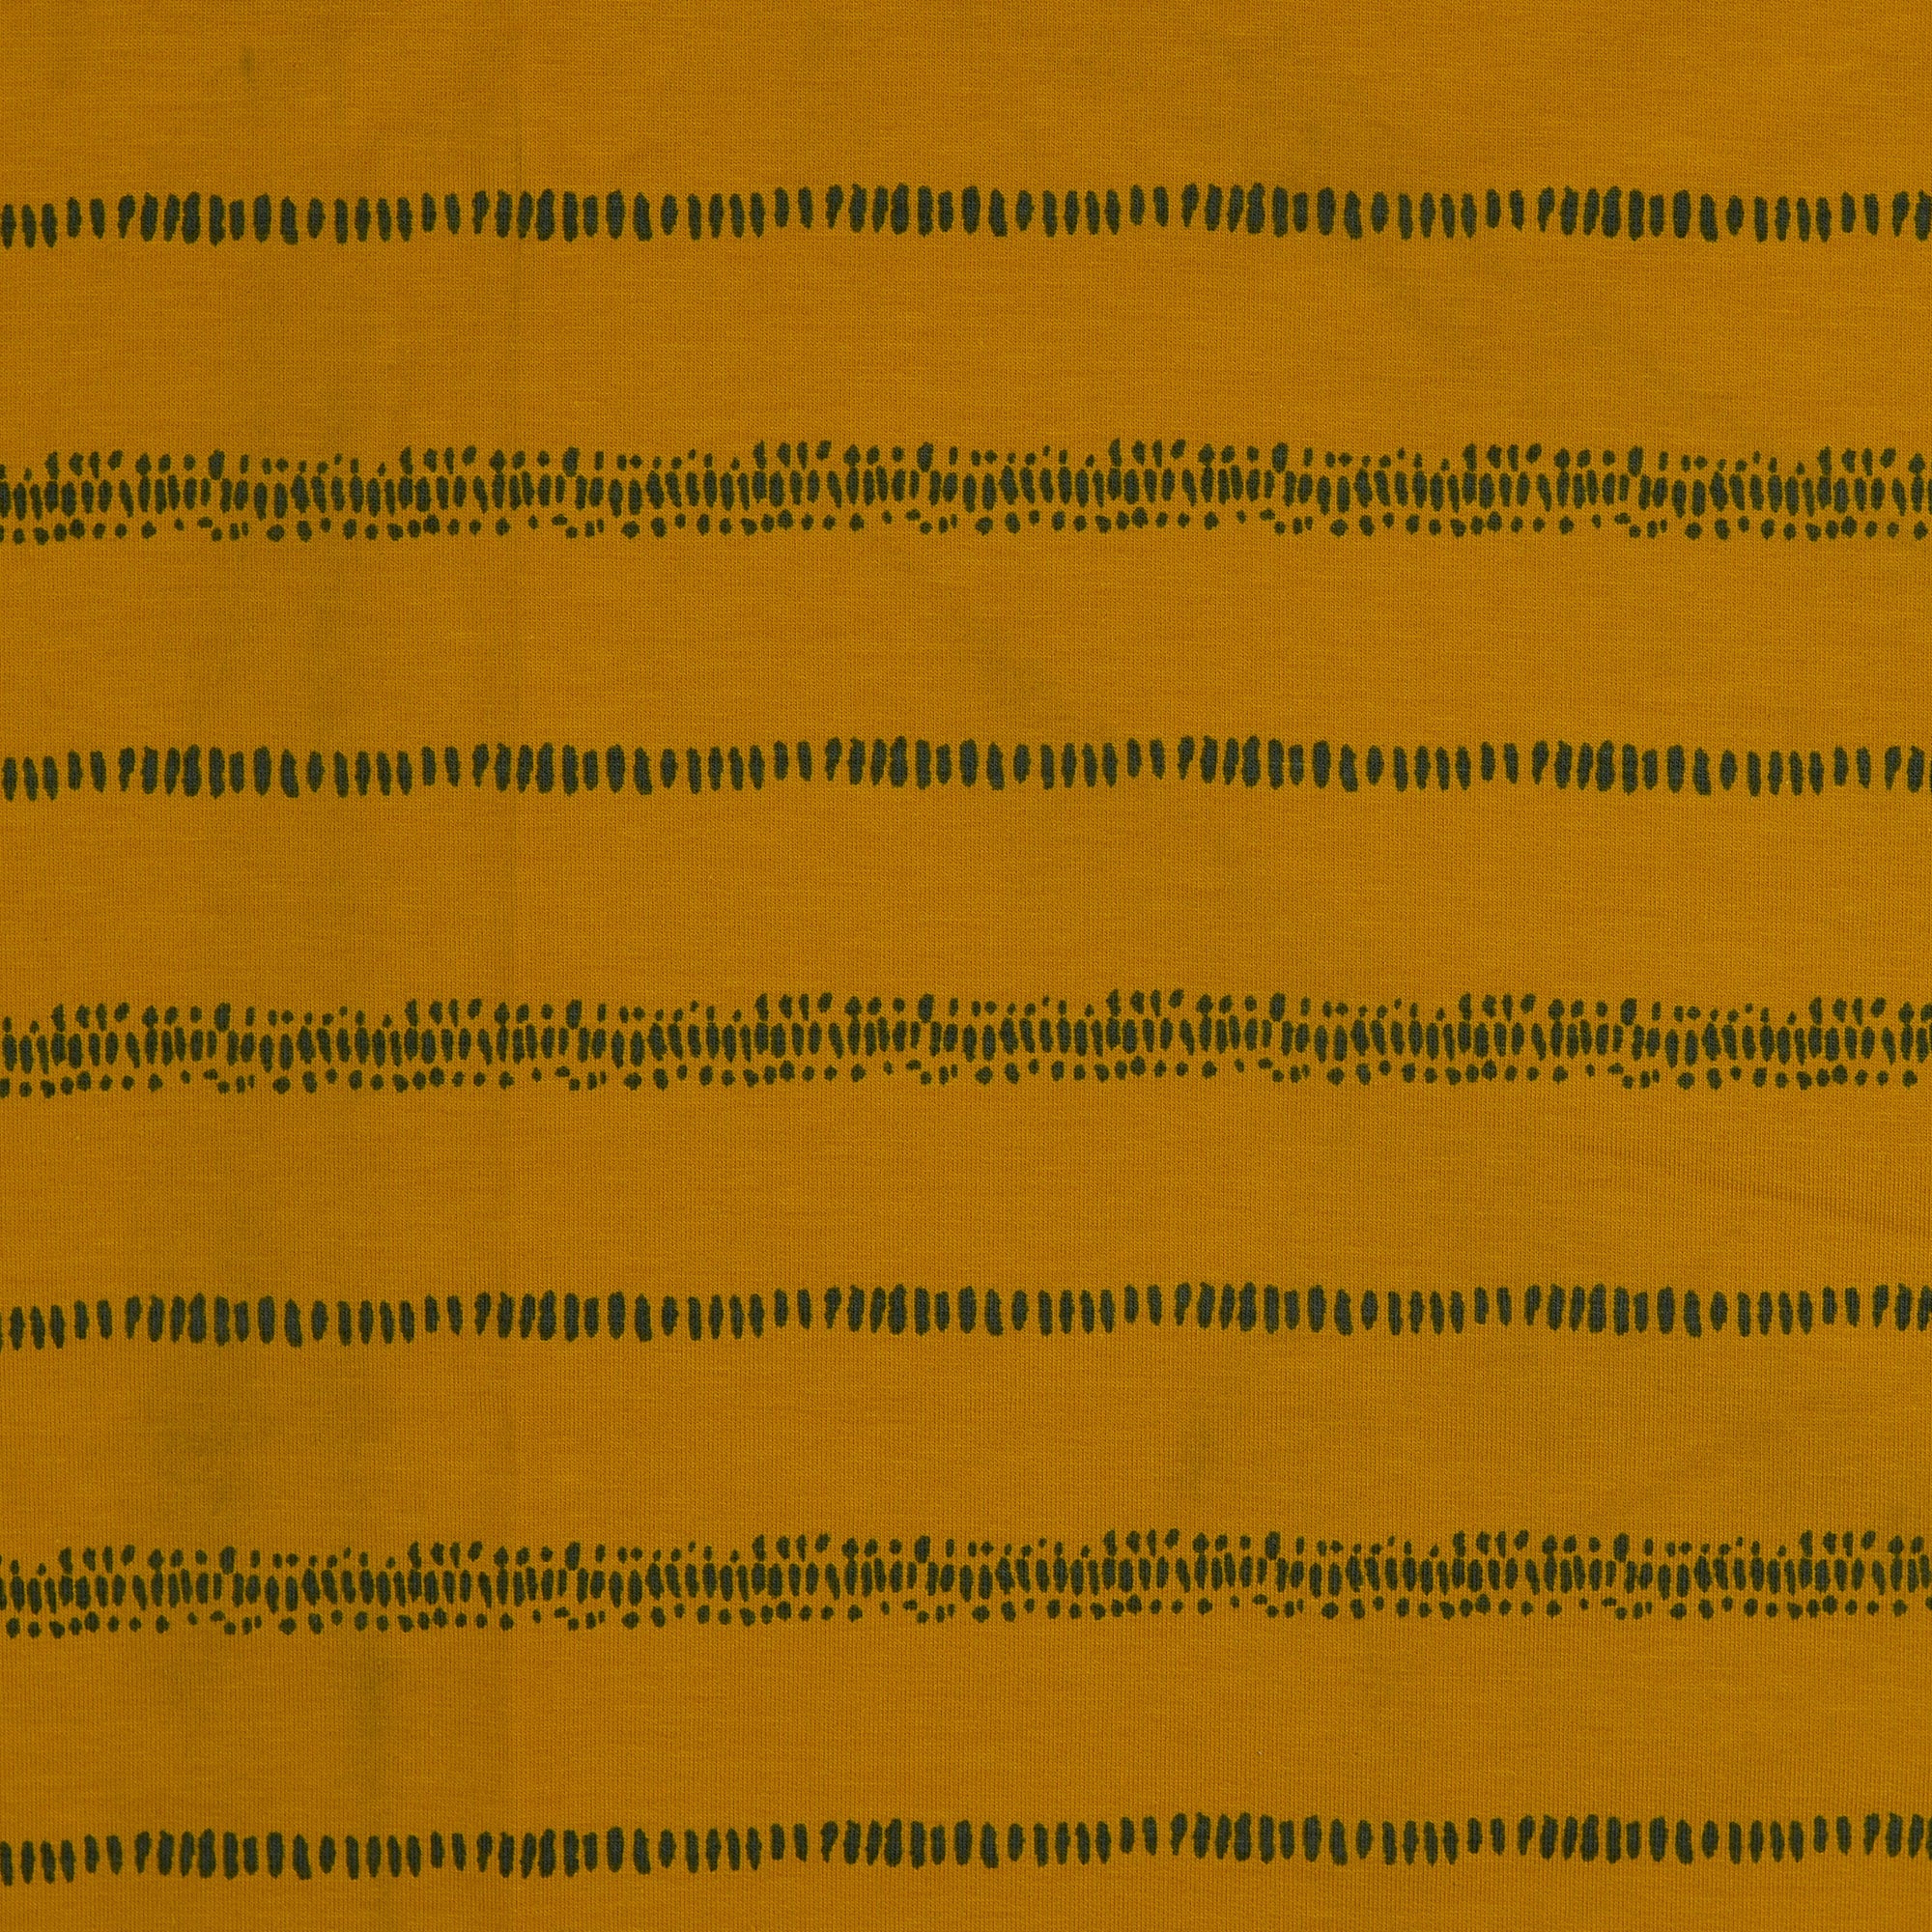 Broken Lines on Mustard Yellow Cotton French Terry Fabric